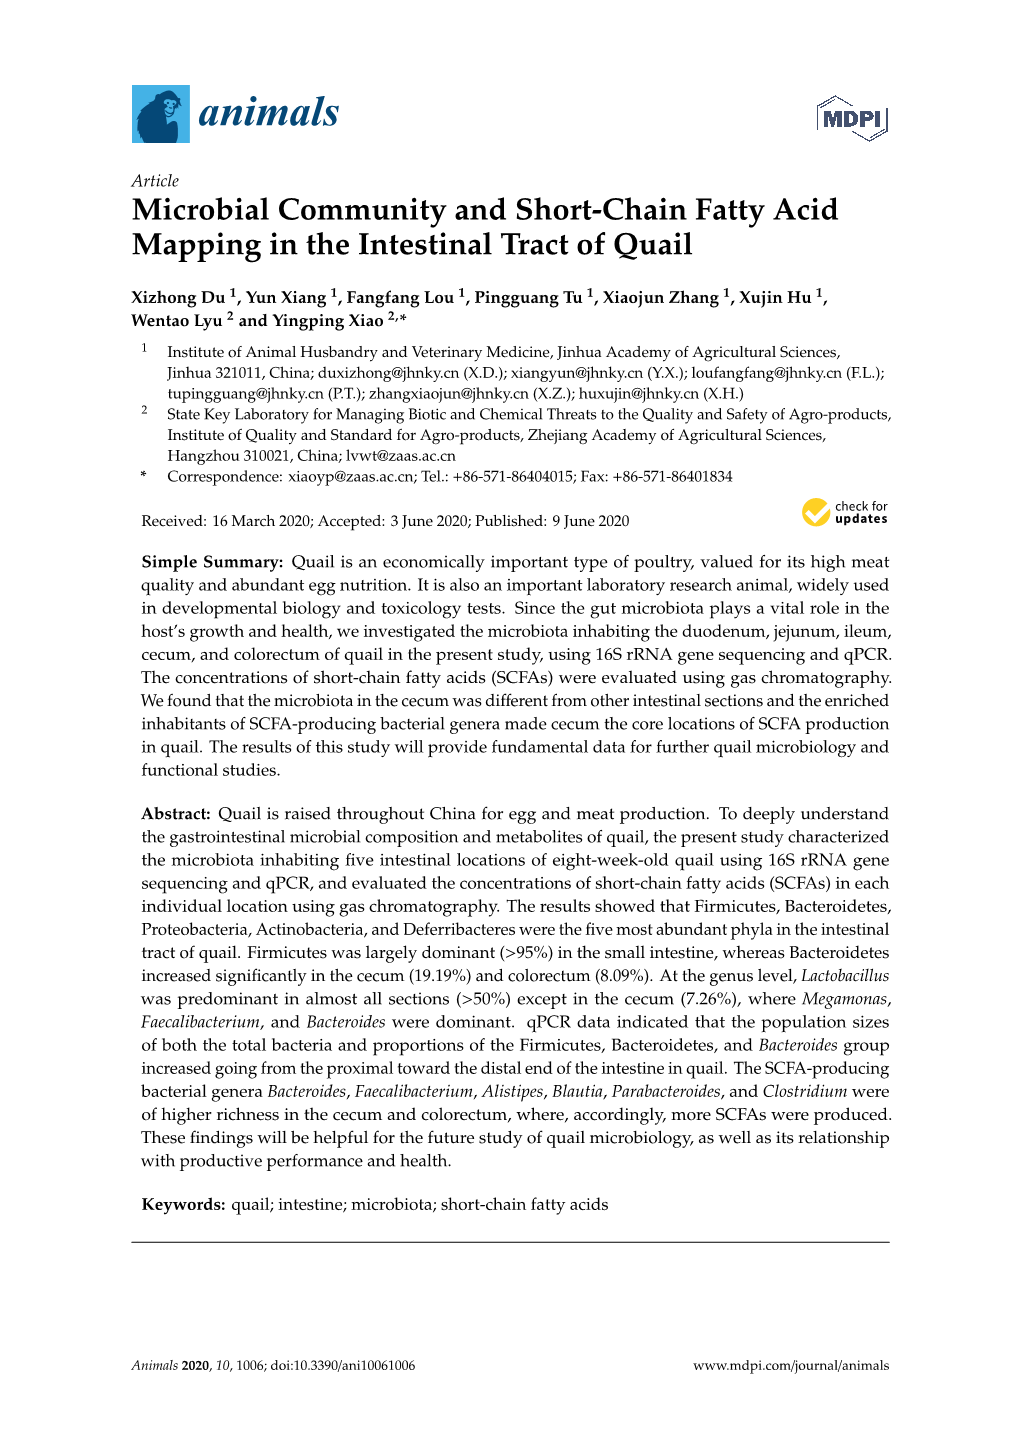 Microbial Community and Short-Chain Fatty Acid Mapping in the Intestinal Tract of Quail